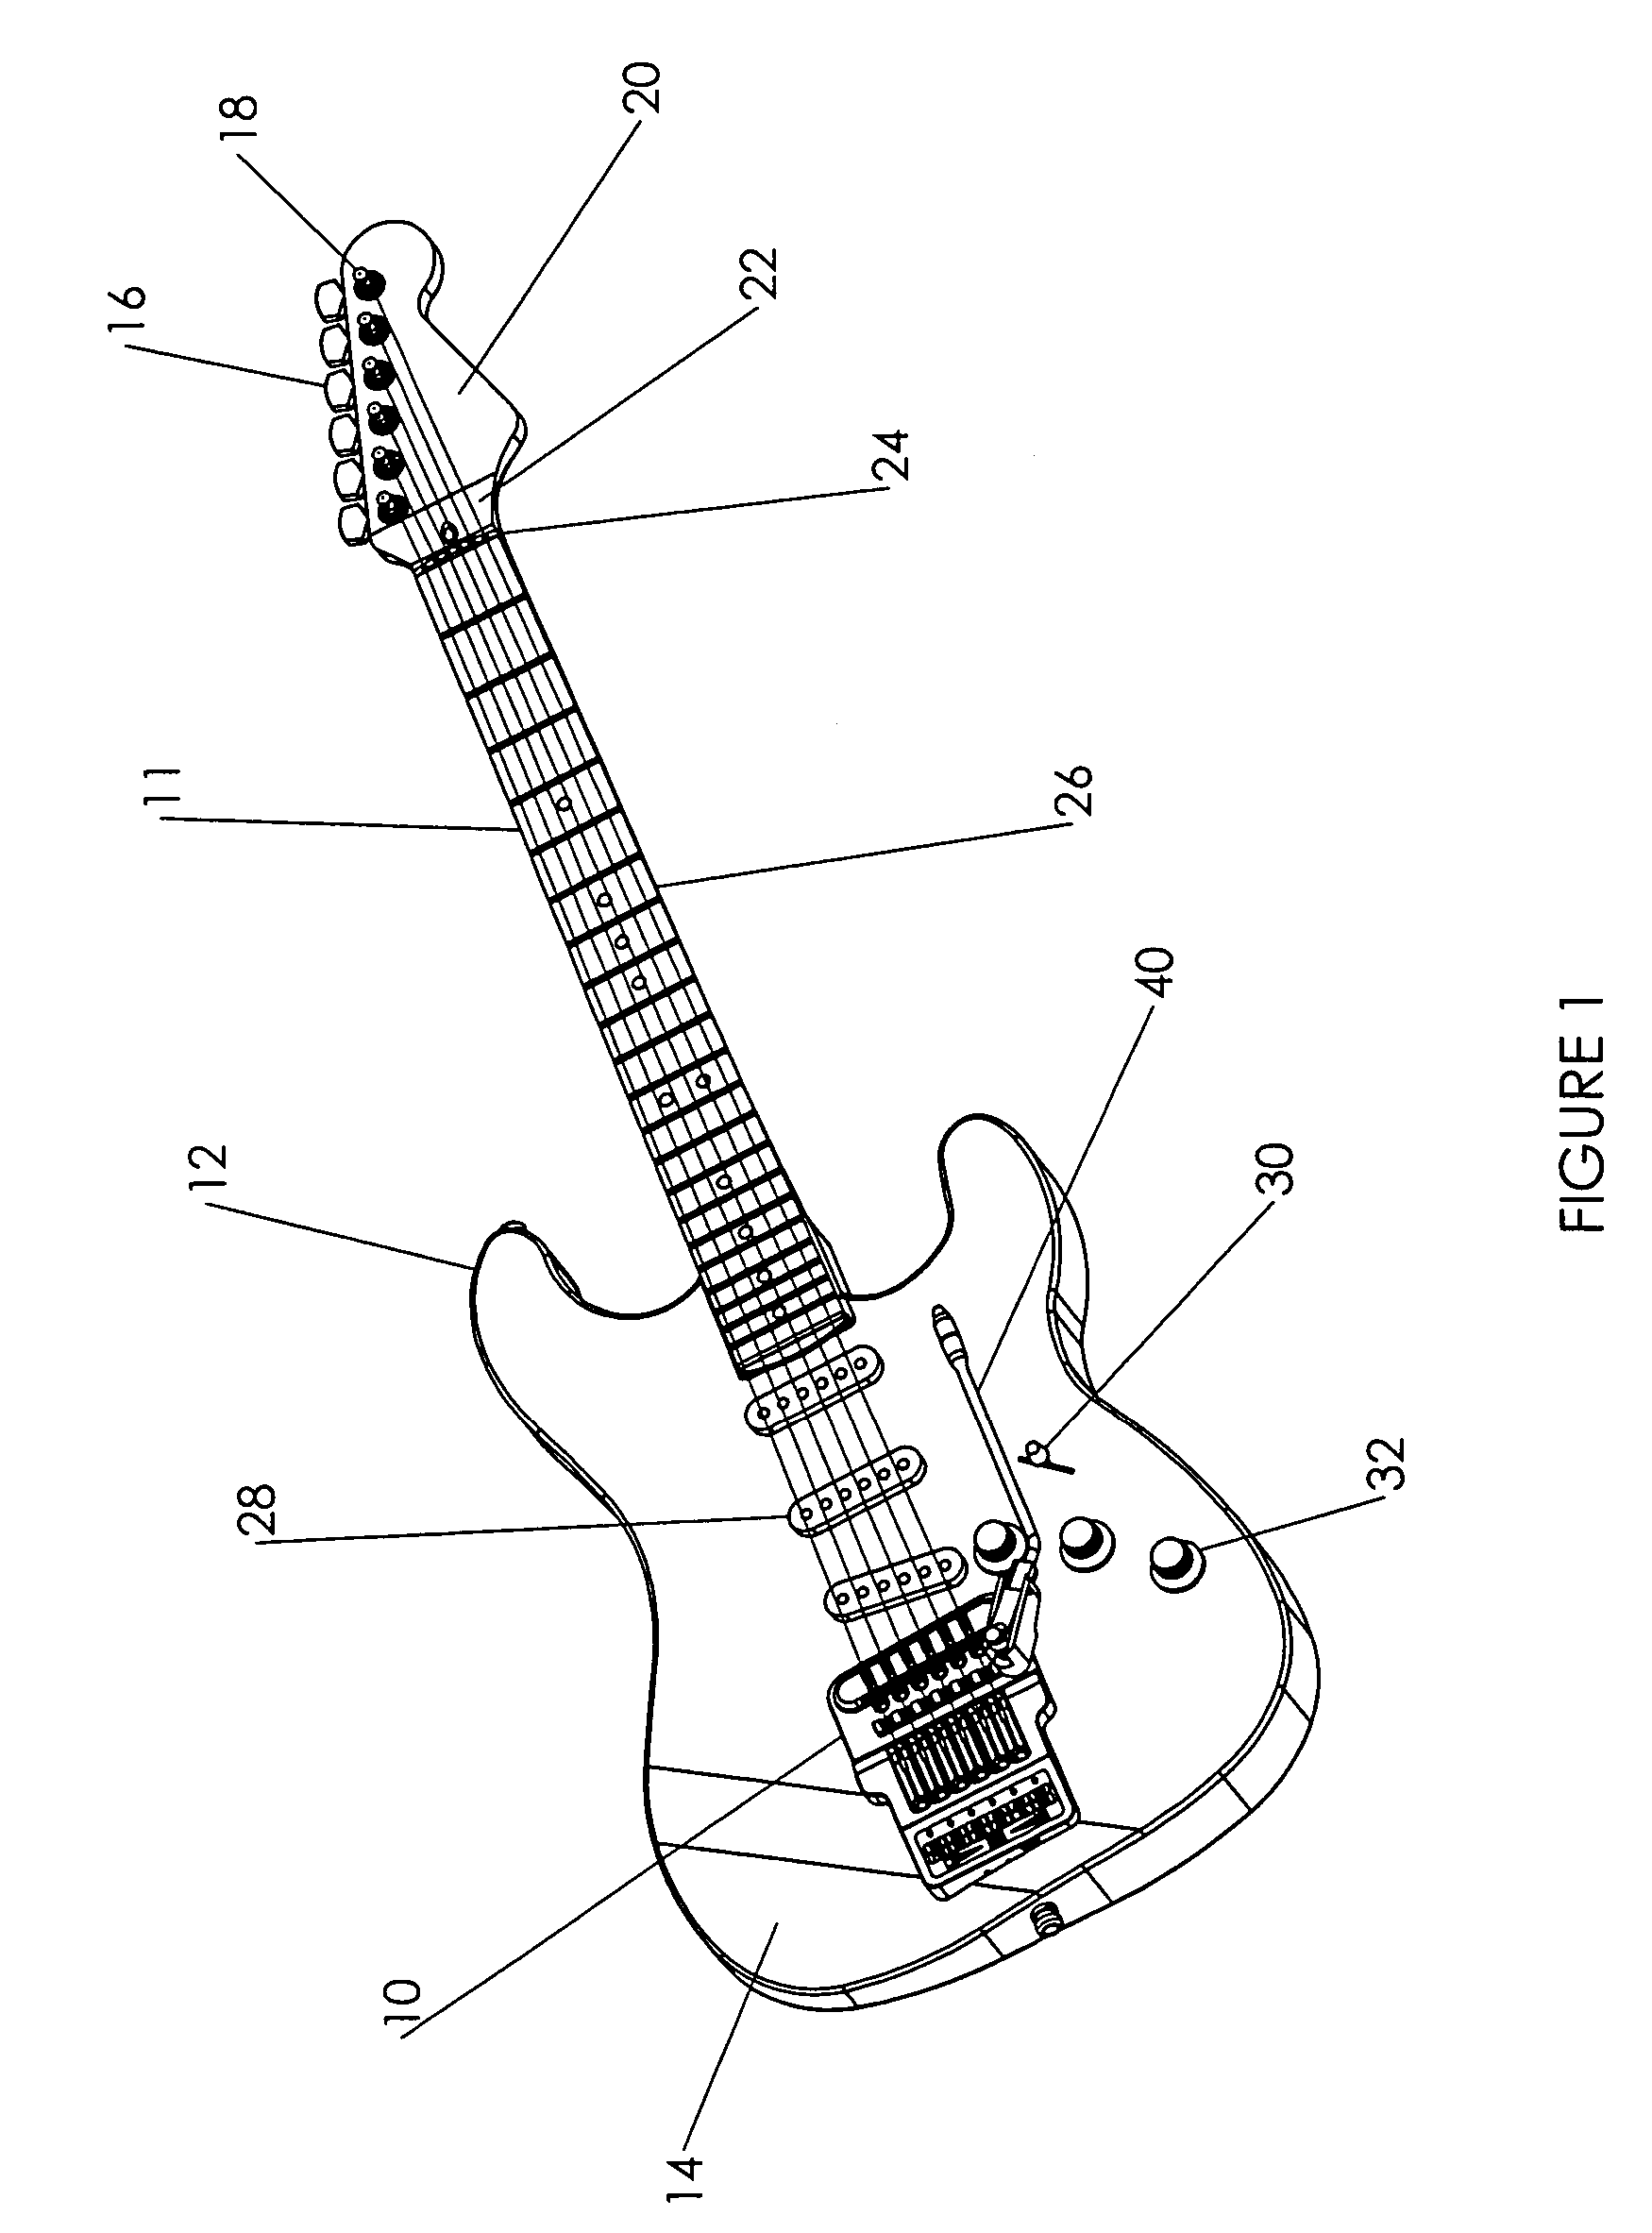 Apparatus and method for self-tuning stringed musical instruments with an accompanying vibrato mechanism